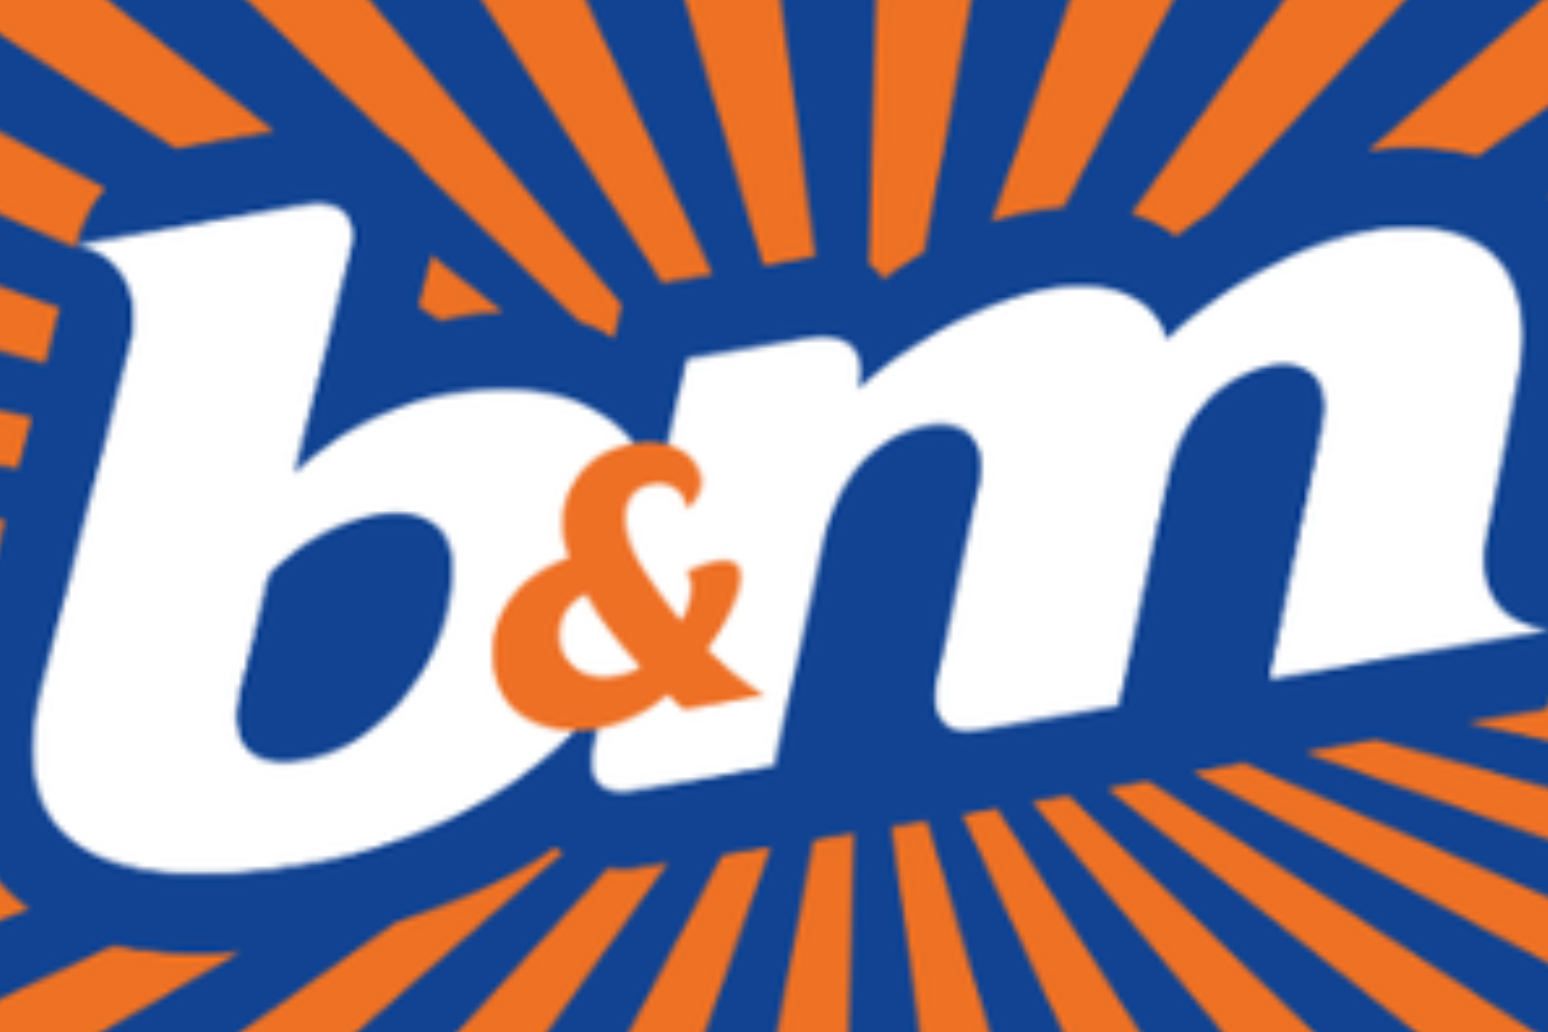 Investors look to future as B&M prepares to announce results 